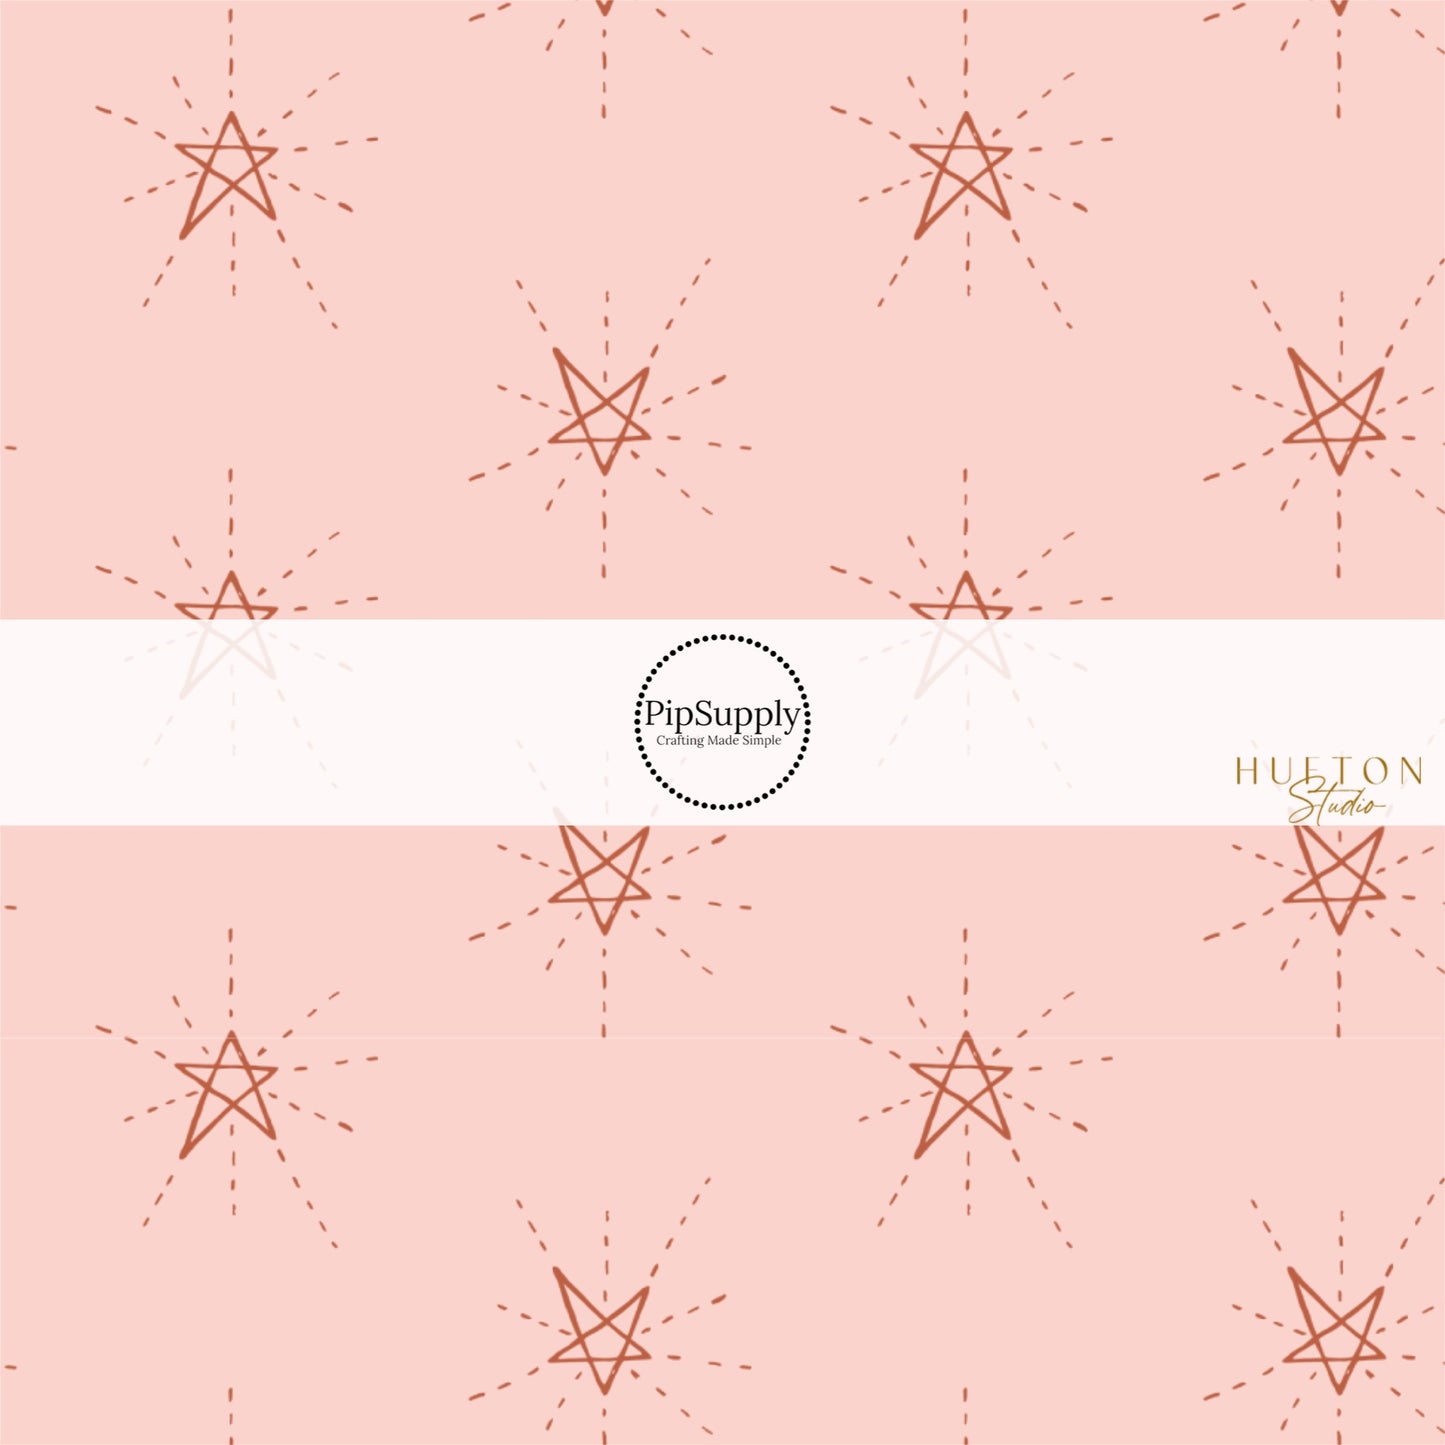 These star themed blush fabric by the yard features dark red outlined stars on light pink. This fun star themed fabric can be used for all your sewing and crafting needs! 